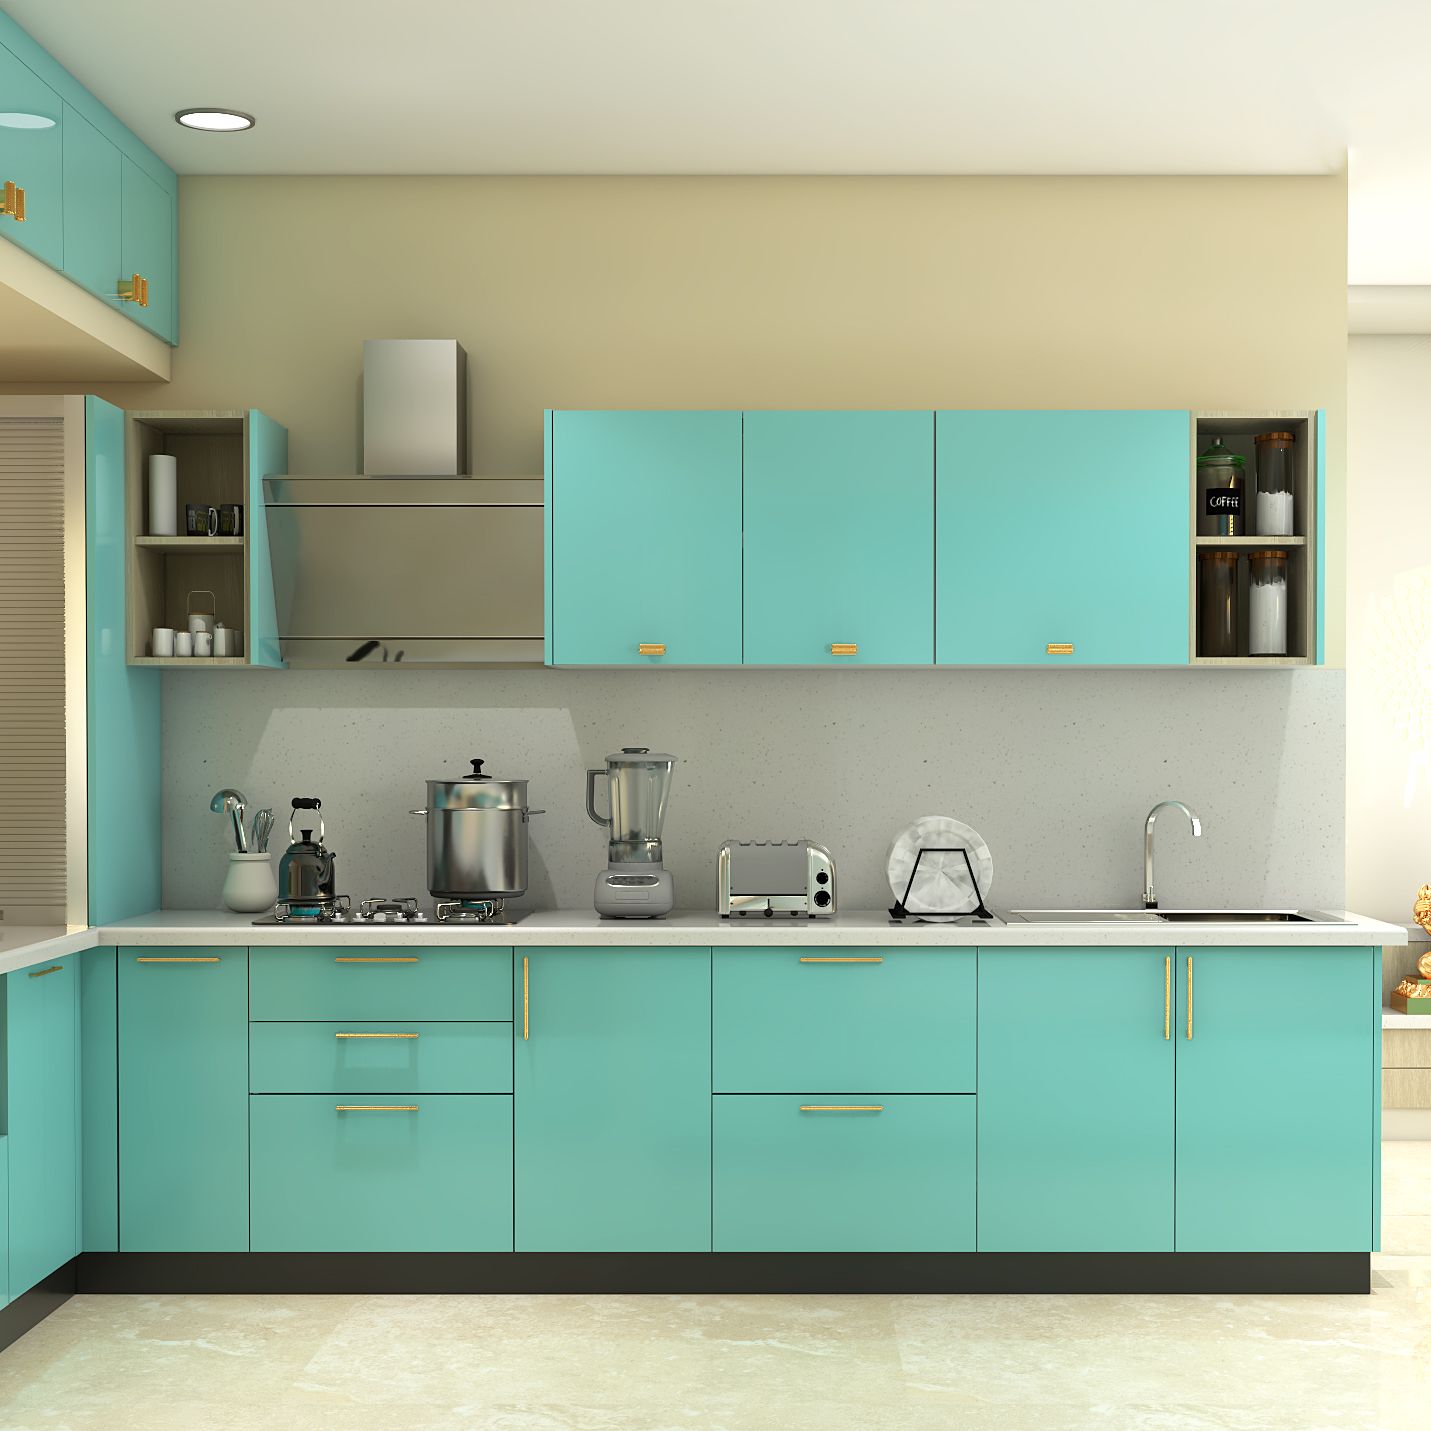 Contemporary Kitchen Design with Aqua-Blue Coloured Cabinets and